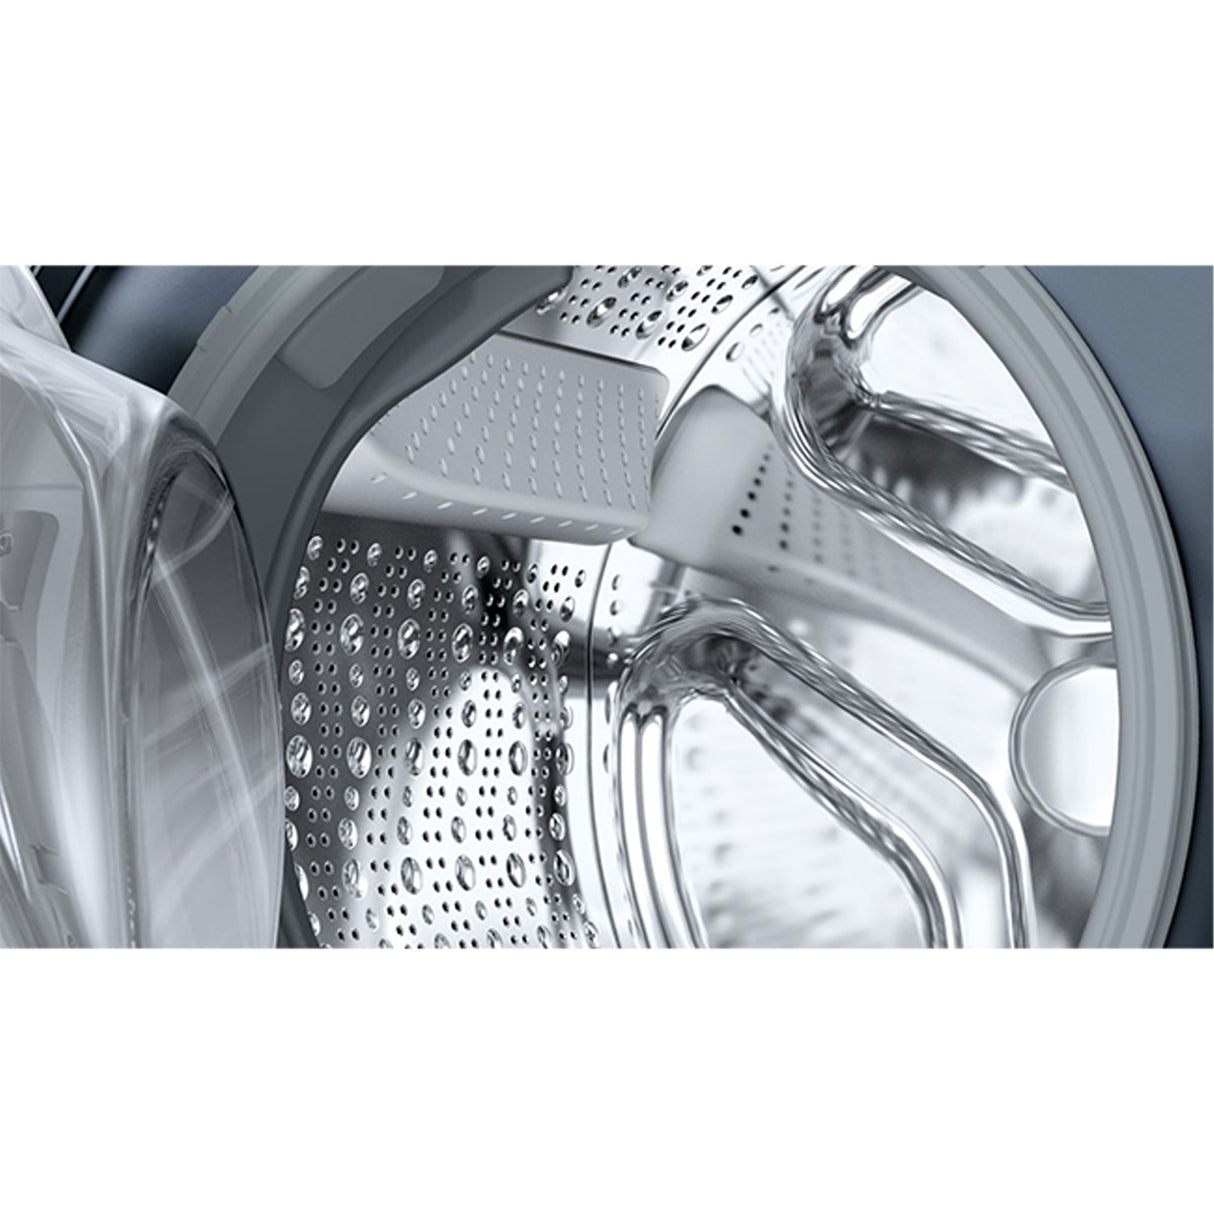 Bosch Series 6 Front Load Washer: 8 kg, 1400 RPM - Convenient and effective.